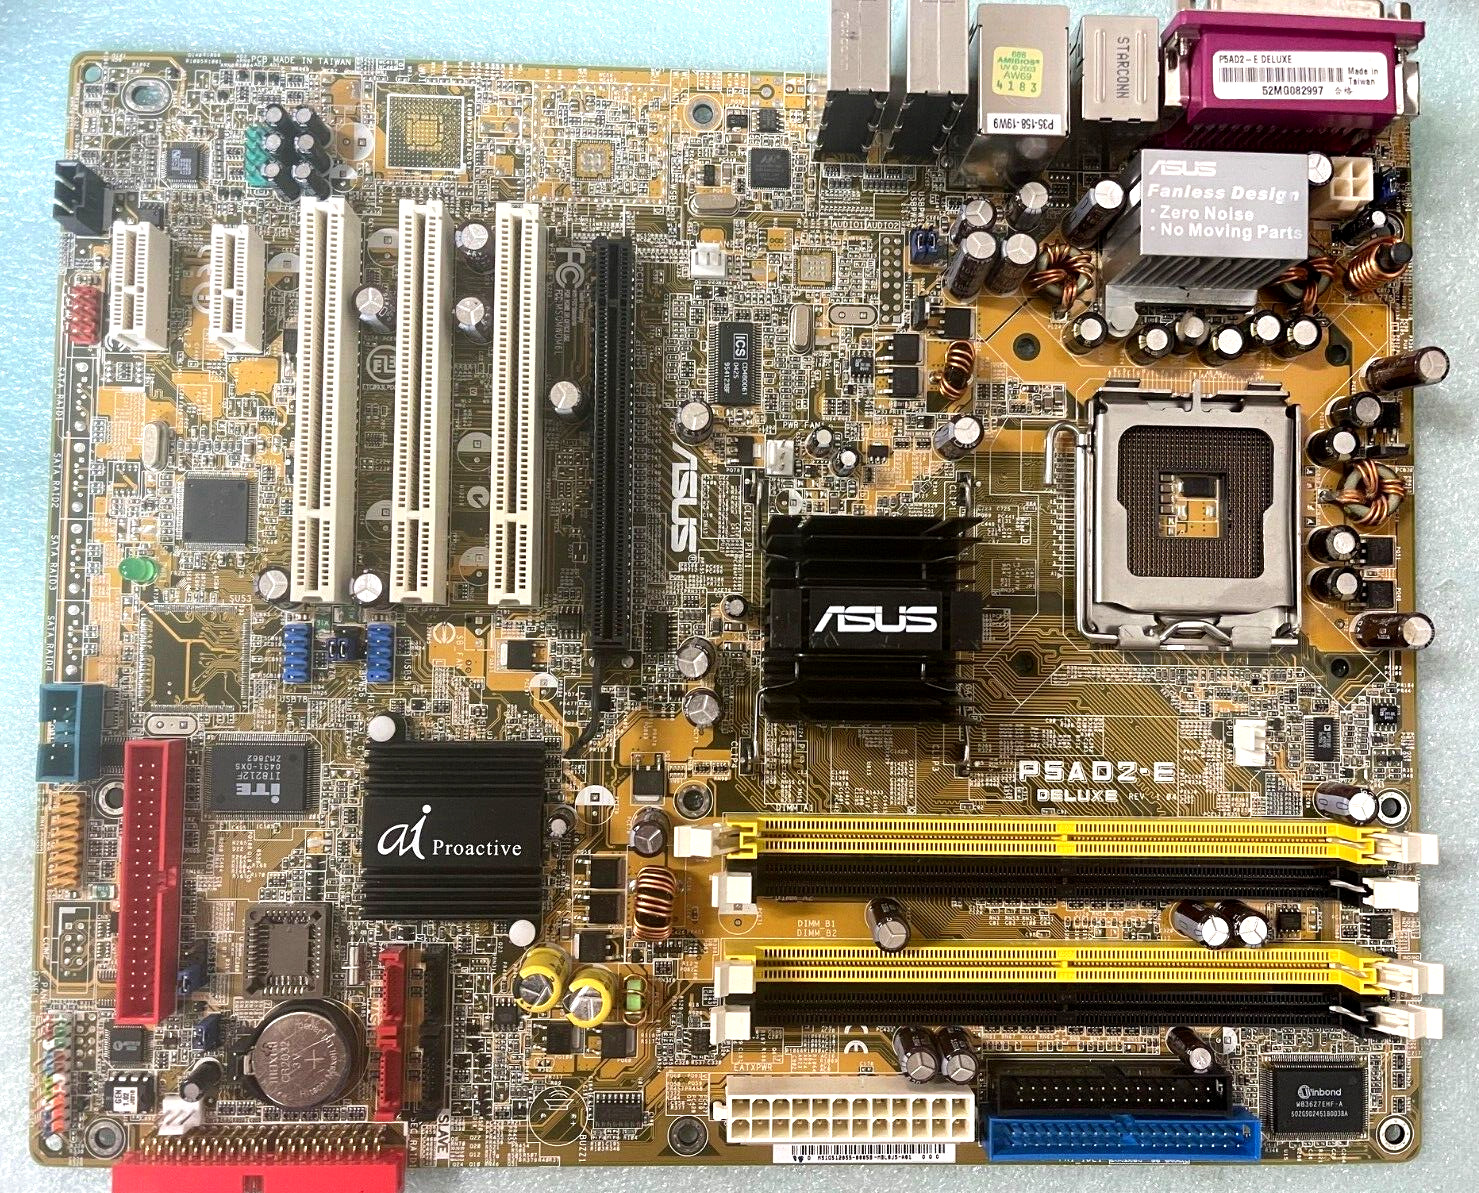 VINTAGE ASUS P5AD2-E DELUXE R1.04 LSA775 ATX MOTHERBOARD SND LAN FIREWIRE MBMX70